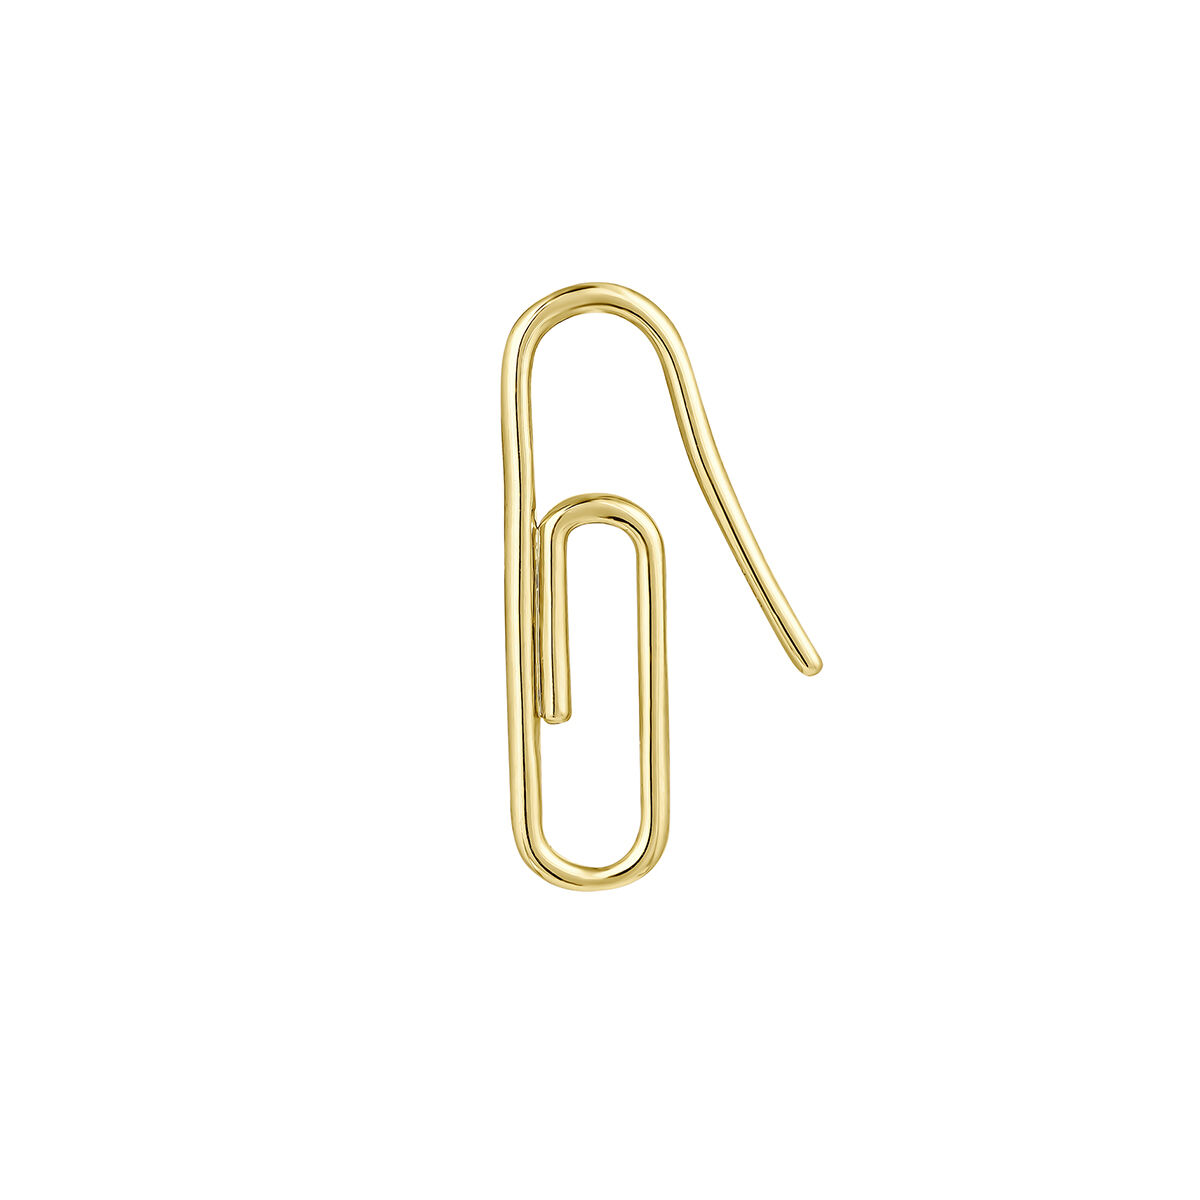 Gold paperclip earring, J05020-02-H, hi-res